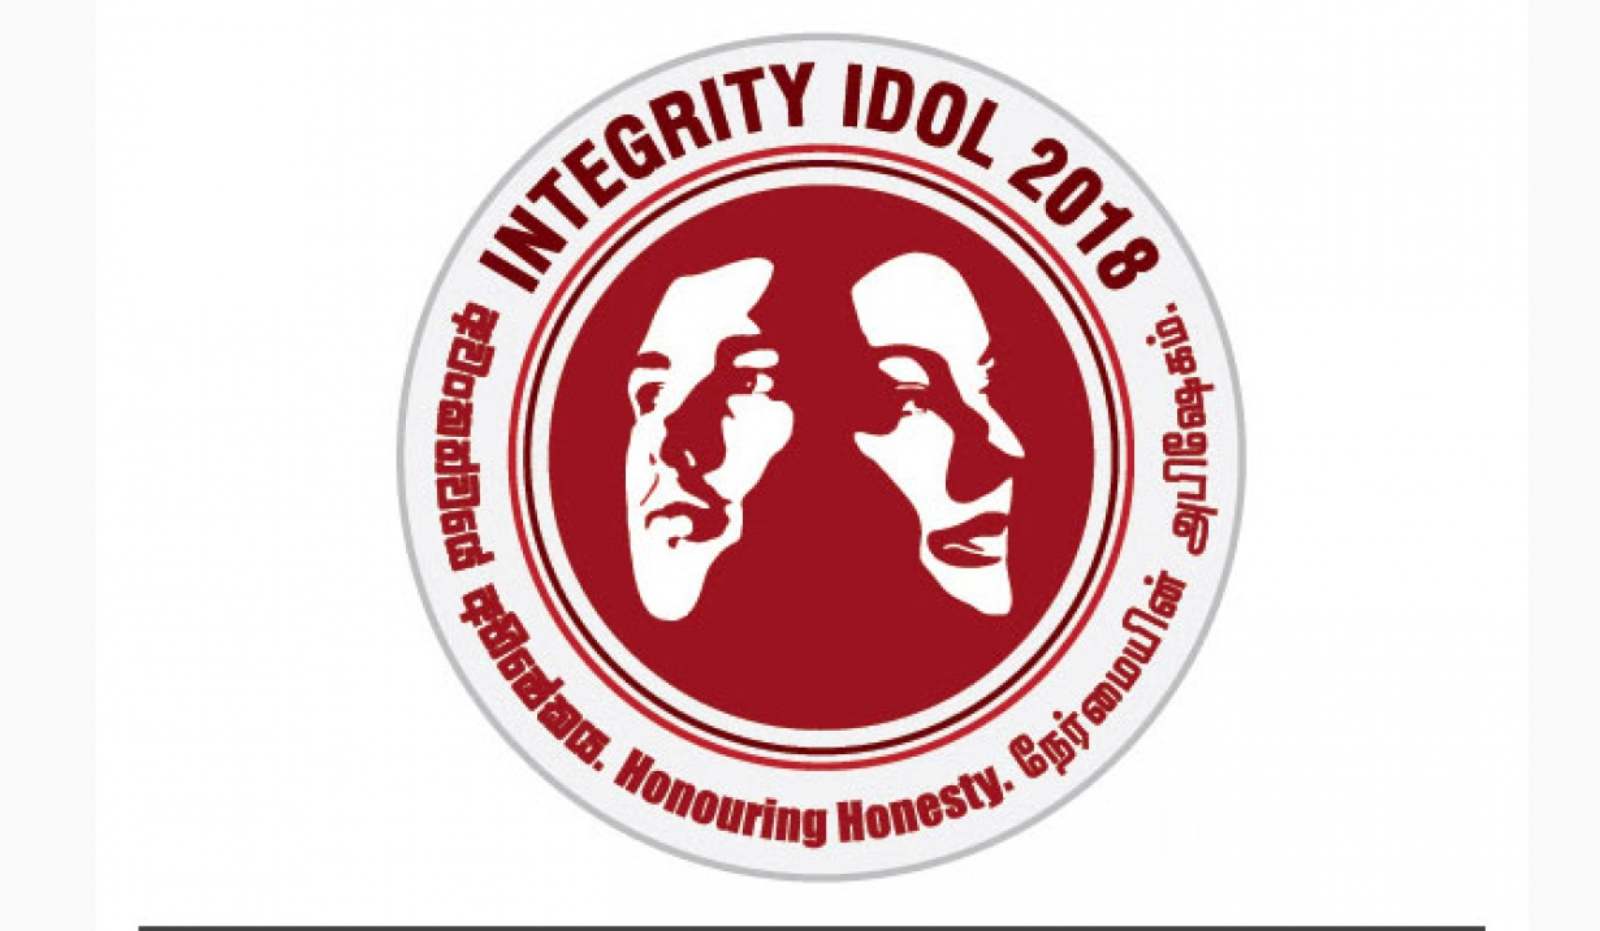 Integrity idol '18 - Voting now open 